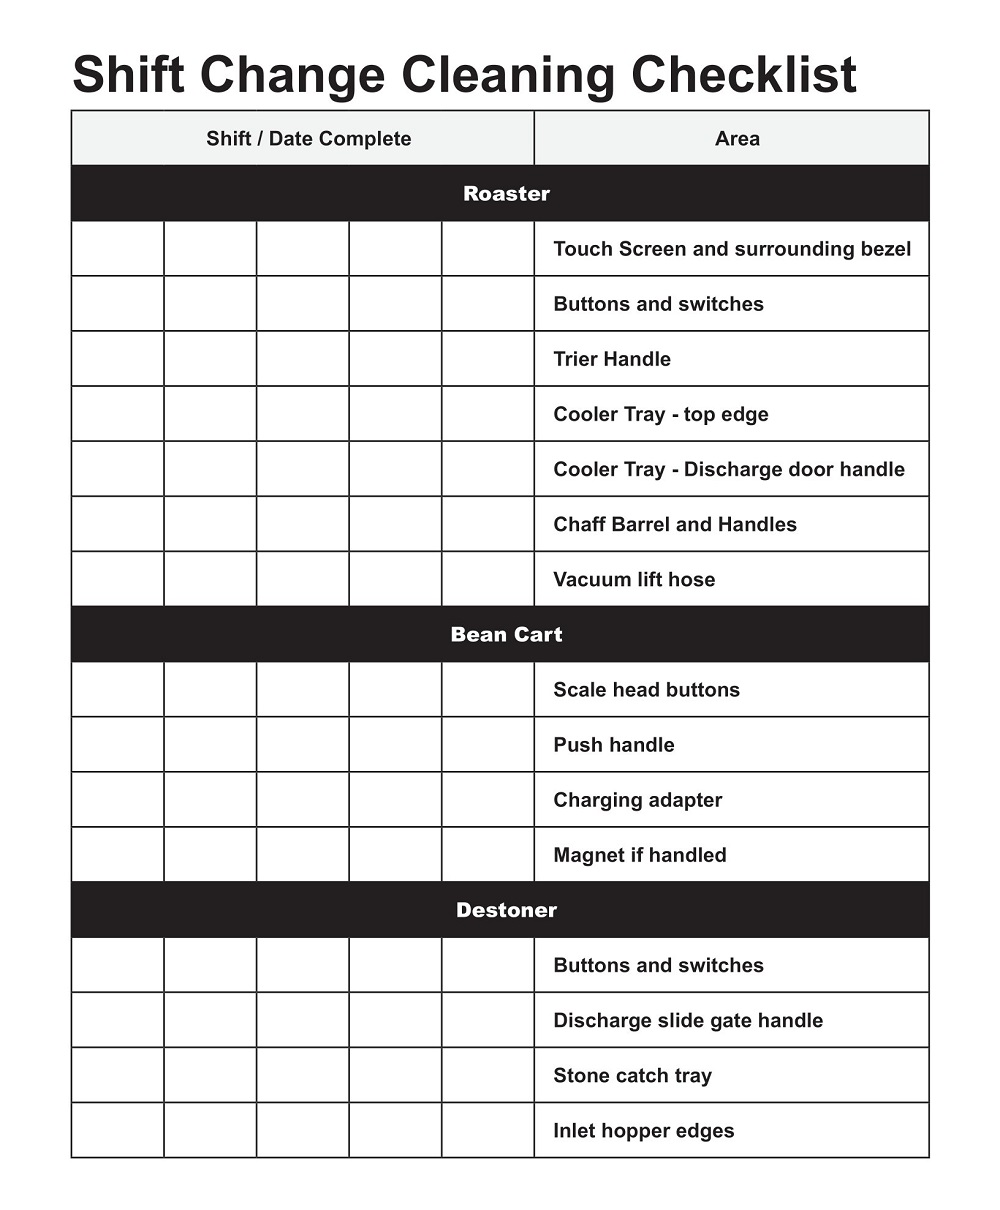 Shift Change Cleaning Checklist Template